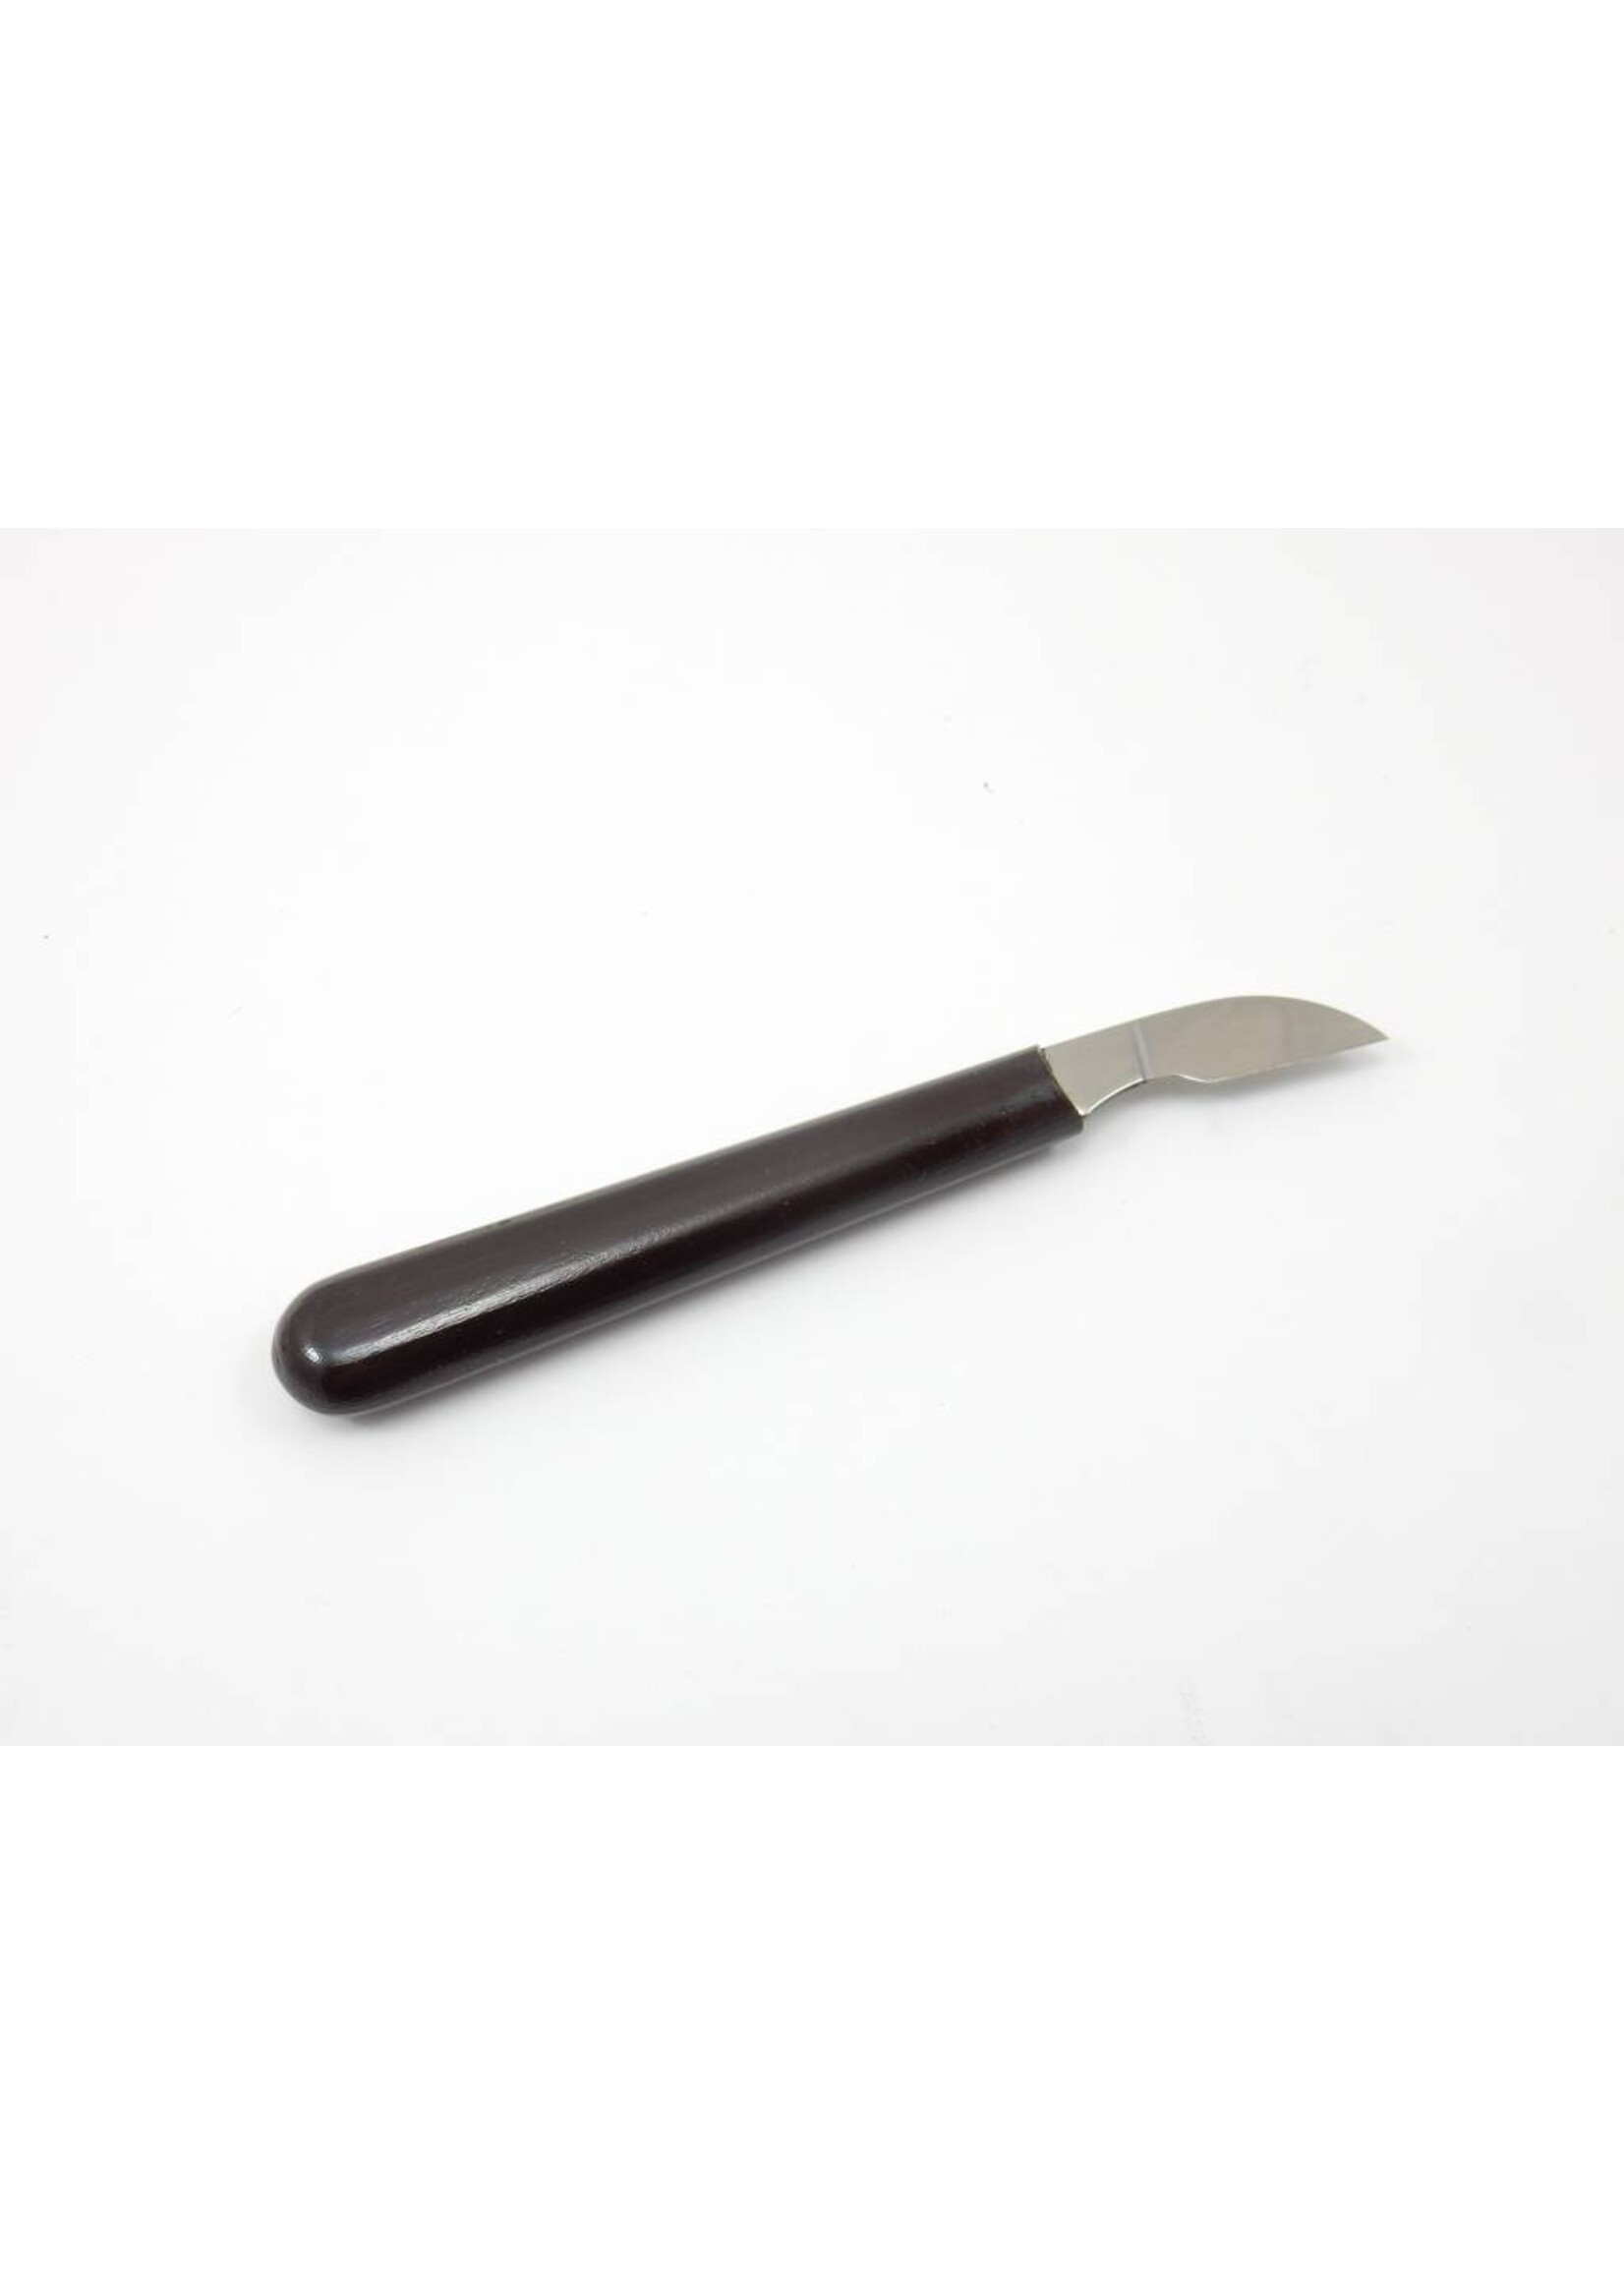 Woodcarving knife curved